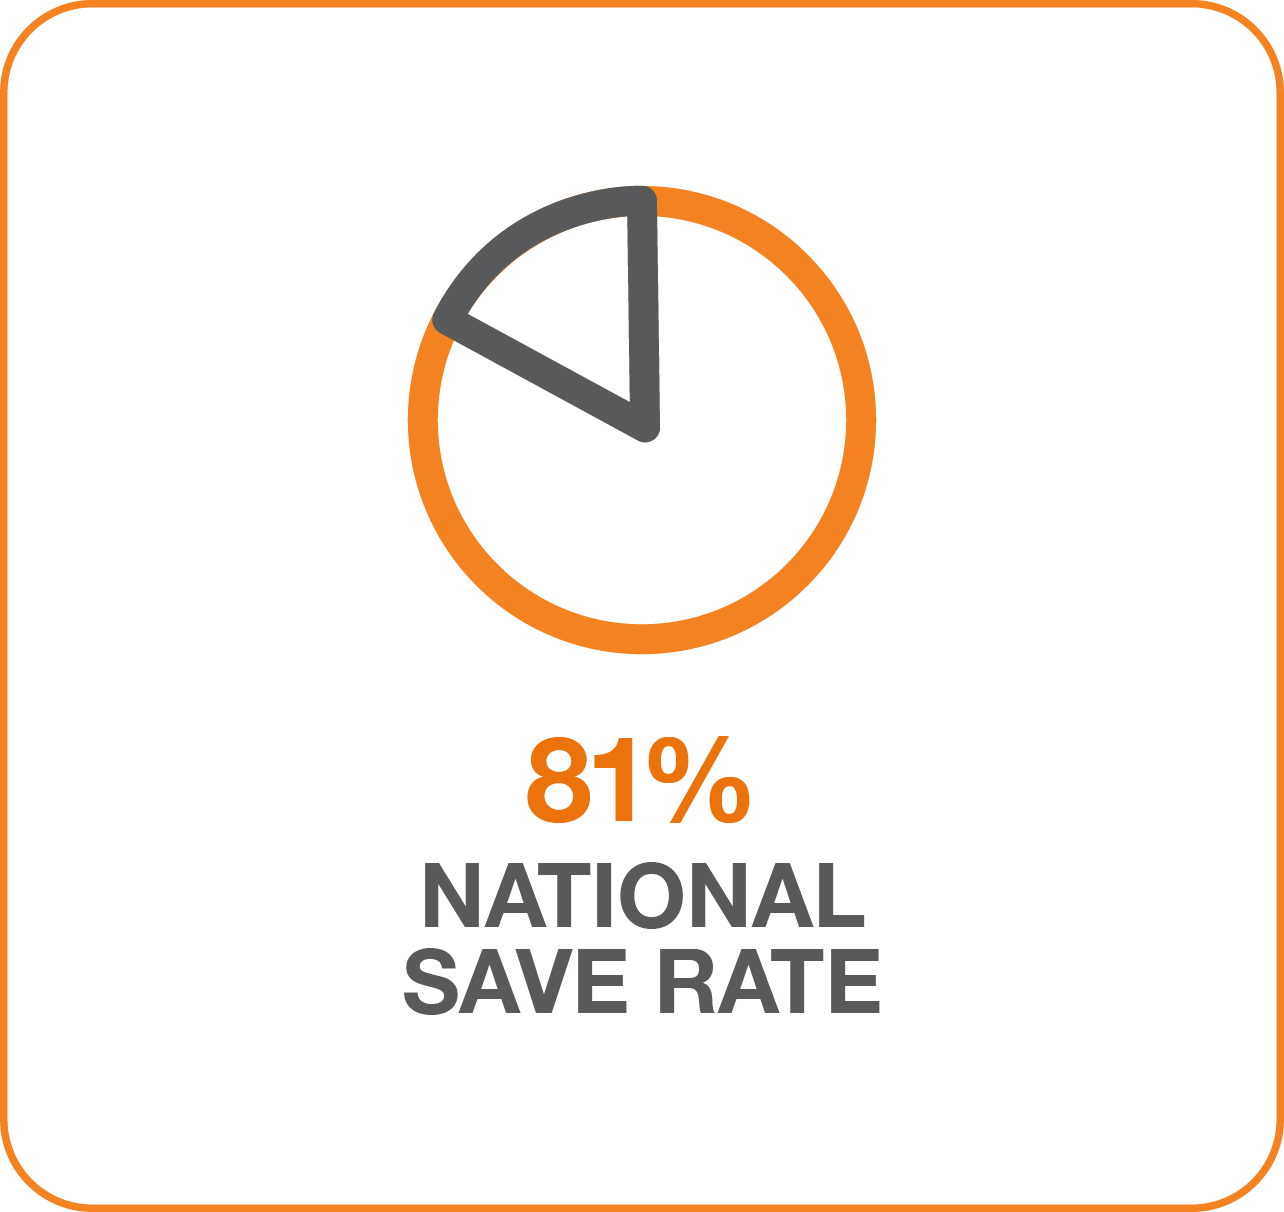 National Save Rate Statistic